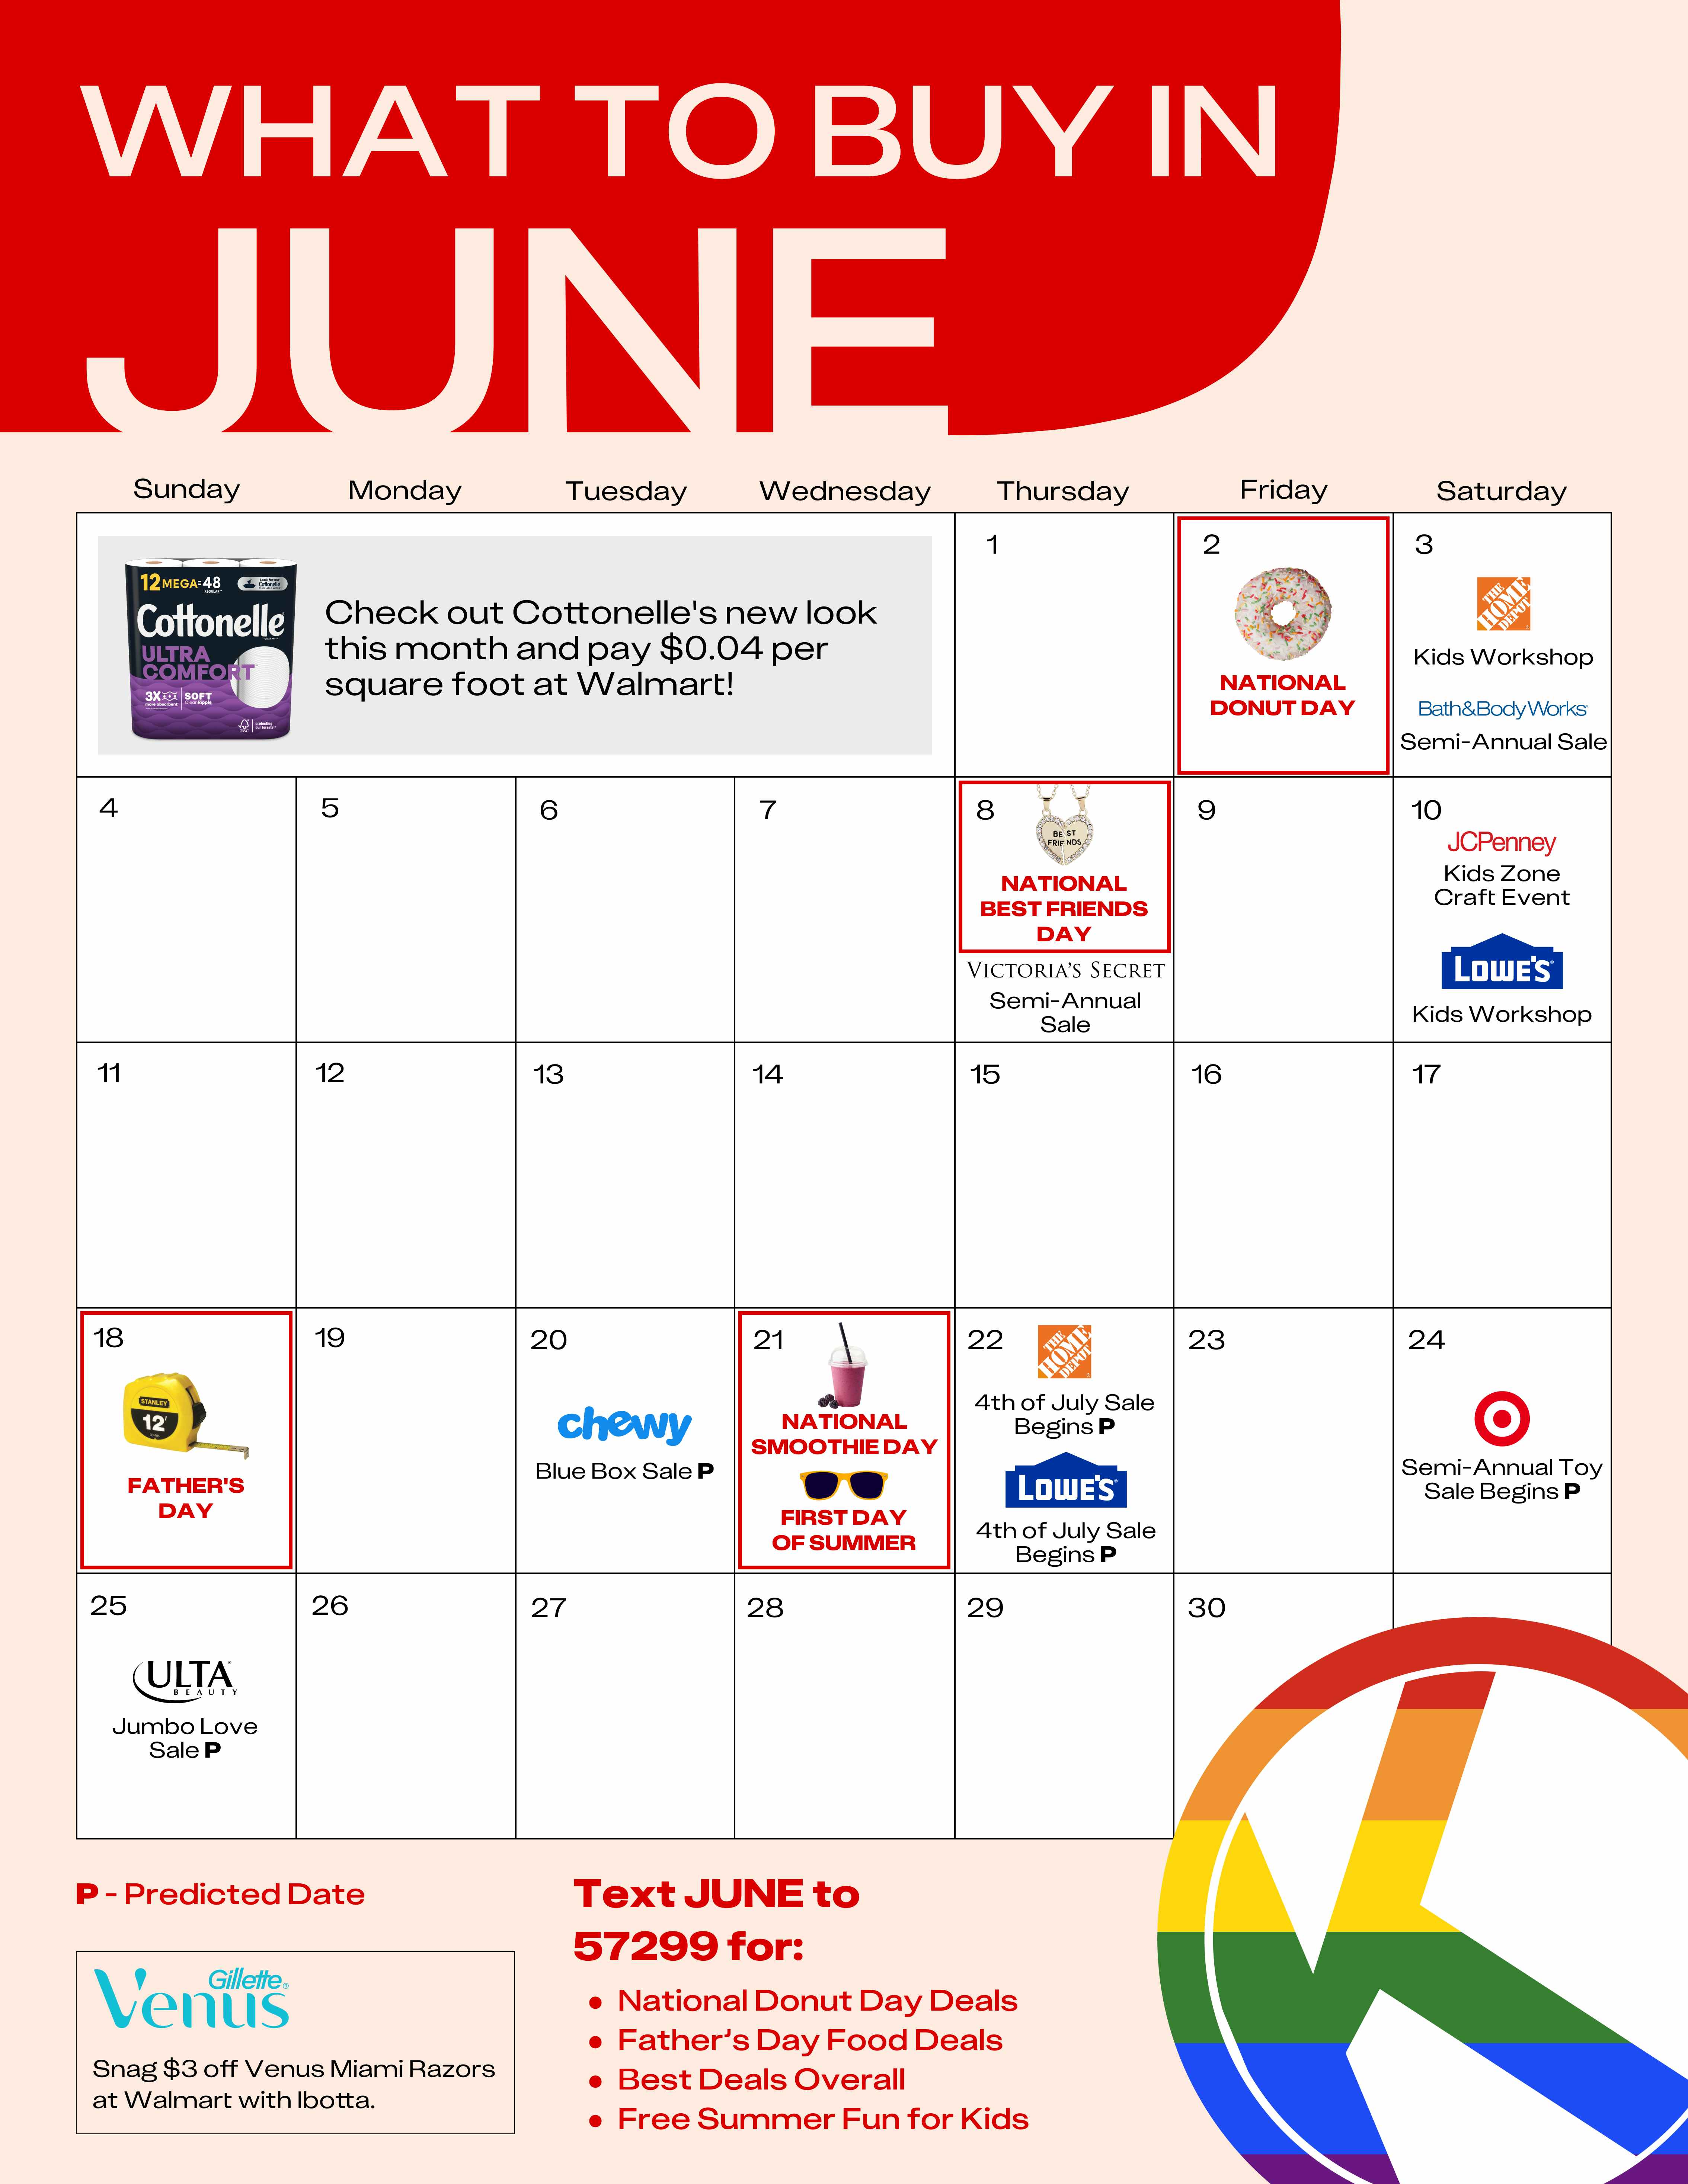 what to buy in june 2023 calendar graphic